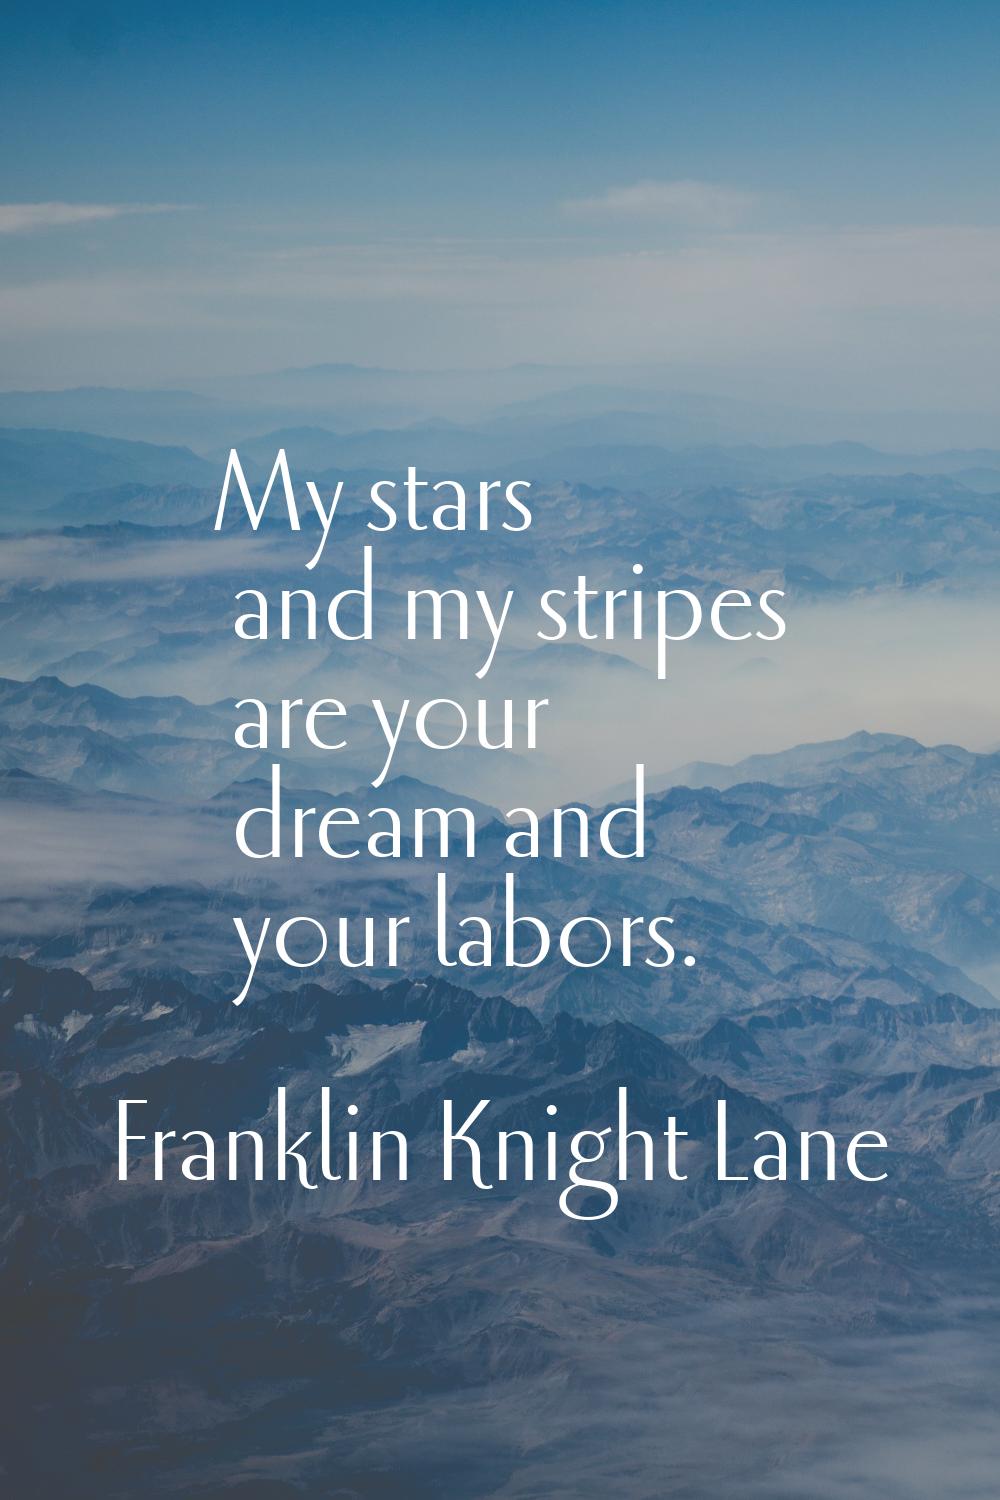 My stars and my stripes are your dream and your labors.